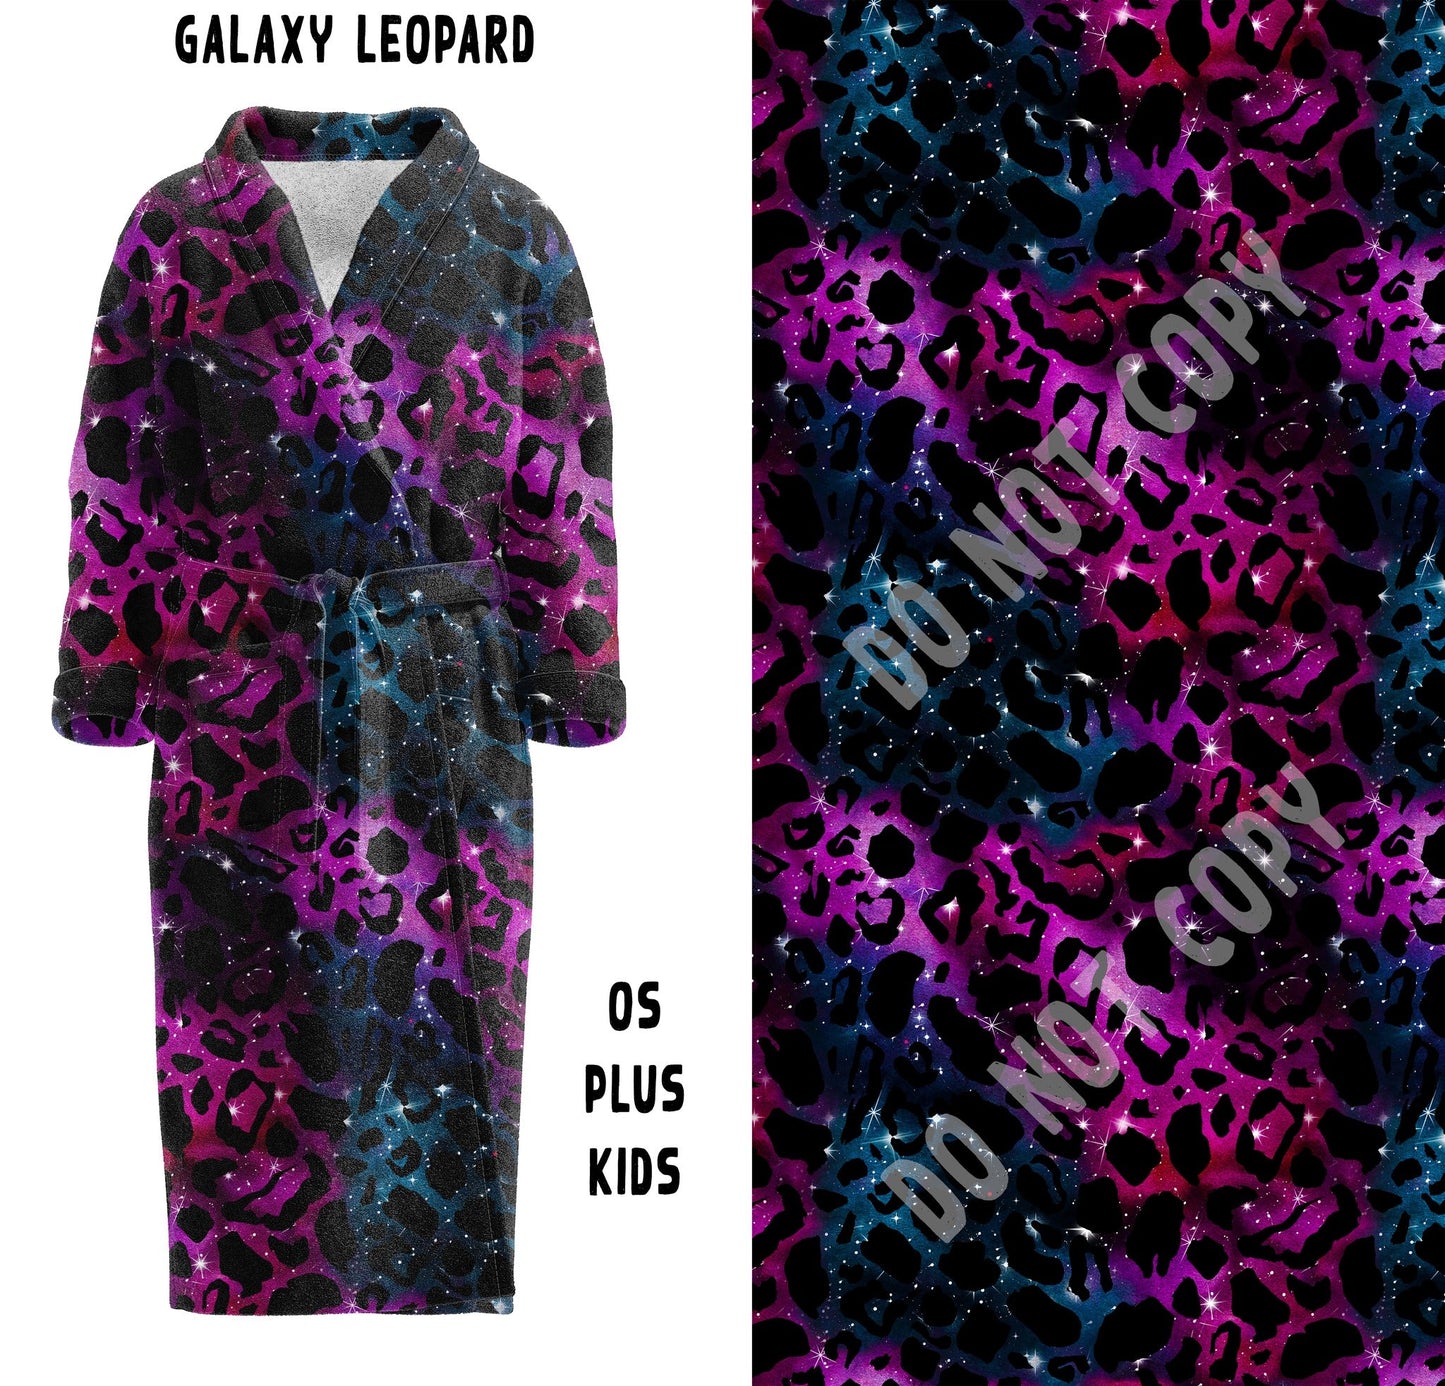 HOUSE ROBES- GALAXY LEOPARD- KIDS S (SIZE 6-8)